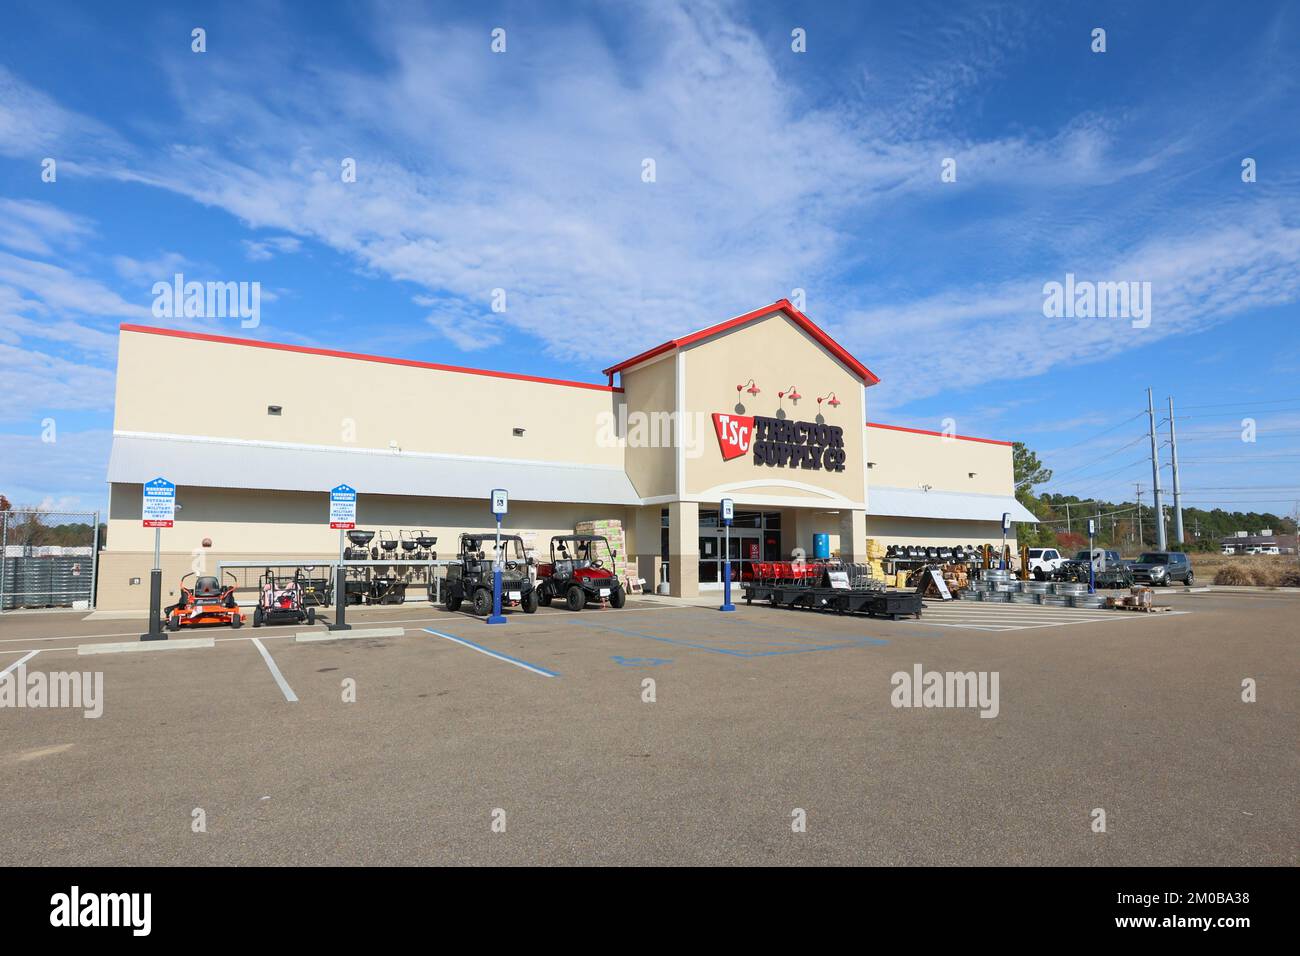 Flowood, MS - December 2, 2022: Tractor Supply Company is a retail chain of stores that sells products for home improvement, agriculture, lawn and gar Stock Photo